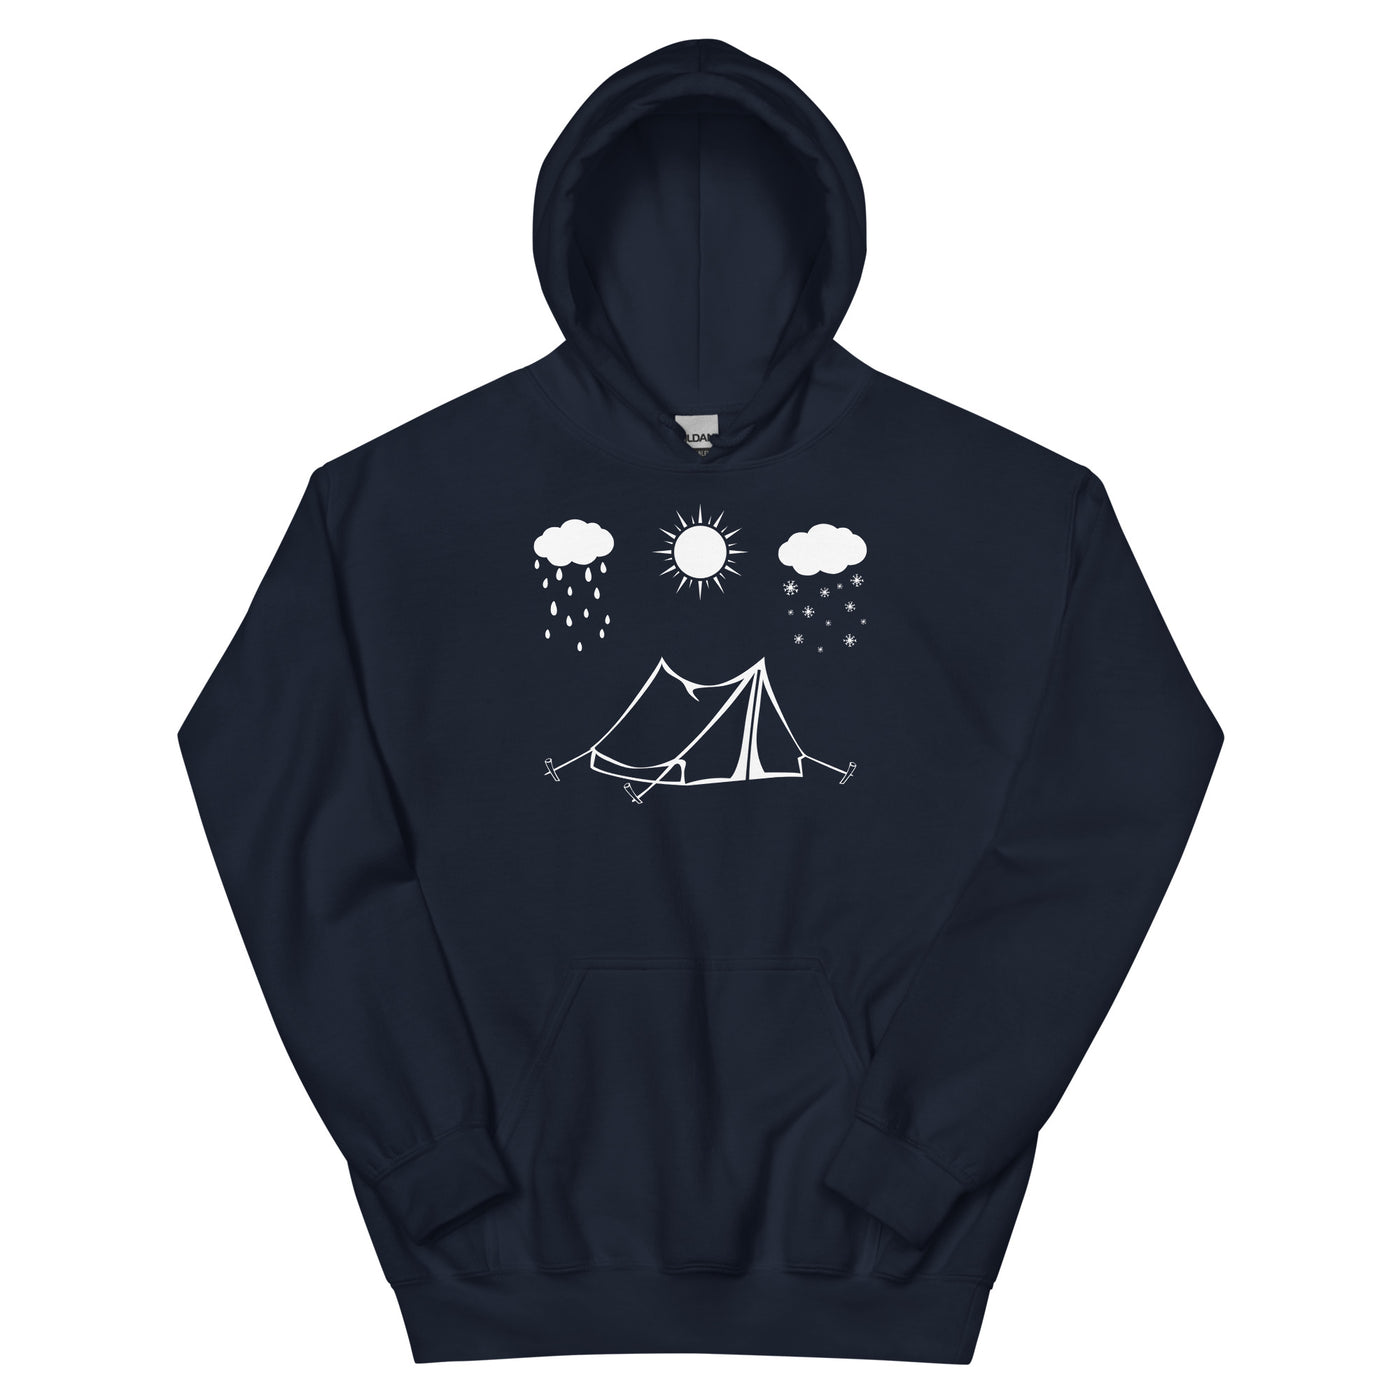 All Seasons And Camping - Unisex Hoodie camping Navy